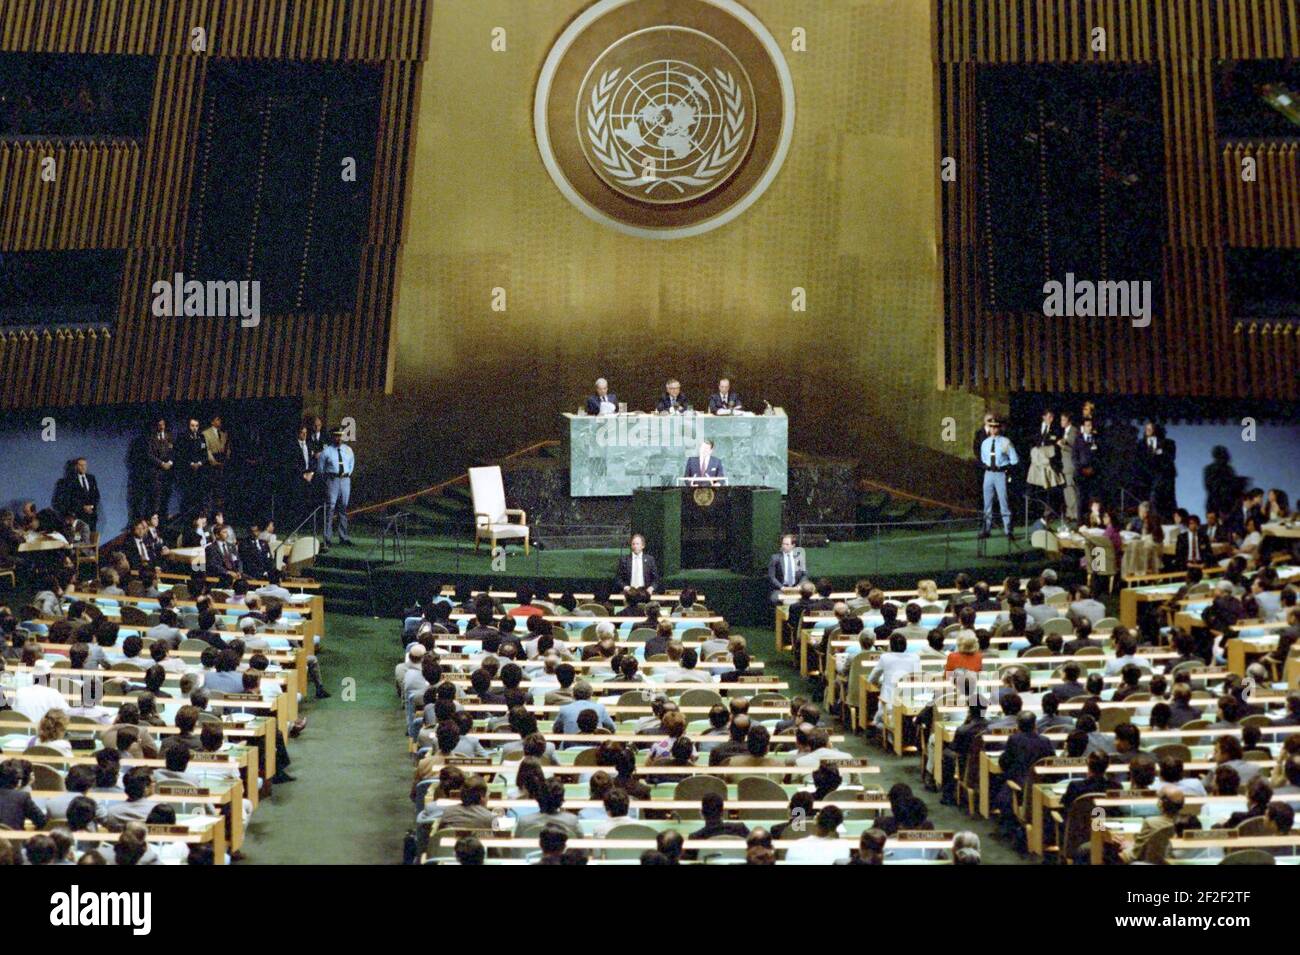 President Ronald Reagan gives a speech in the General Assembly Hall at the United Nations. Stock Photo